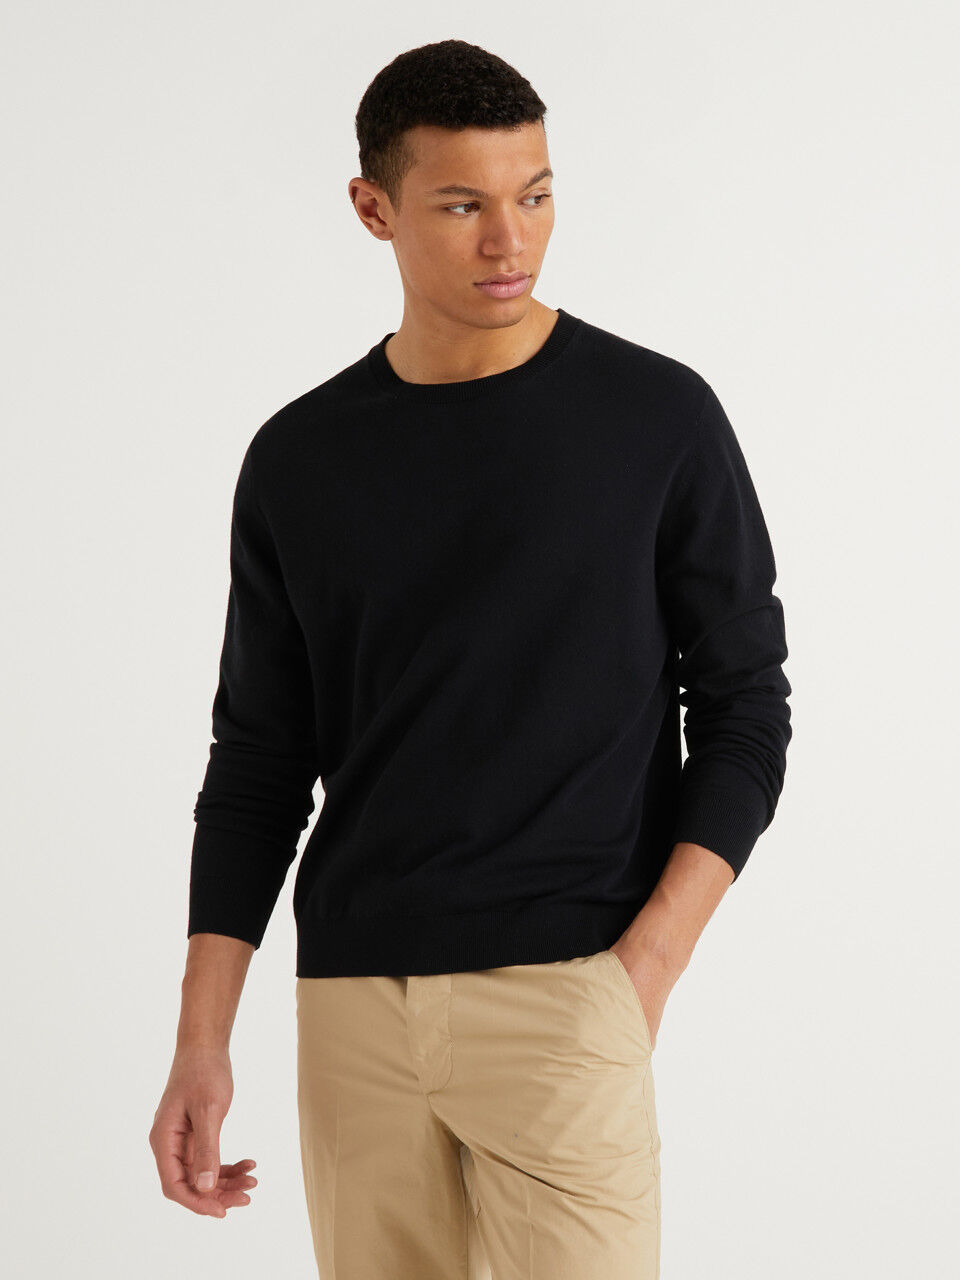 Men's Iconic Tricot Cotton Knitwear Collection 2022 | Benetton